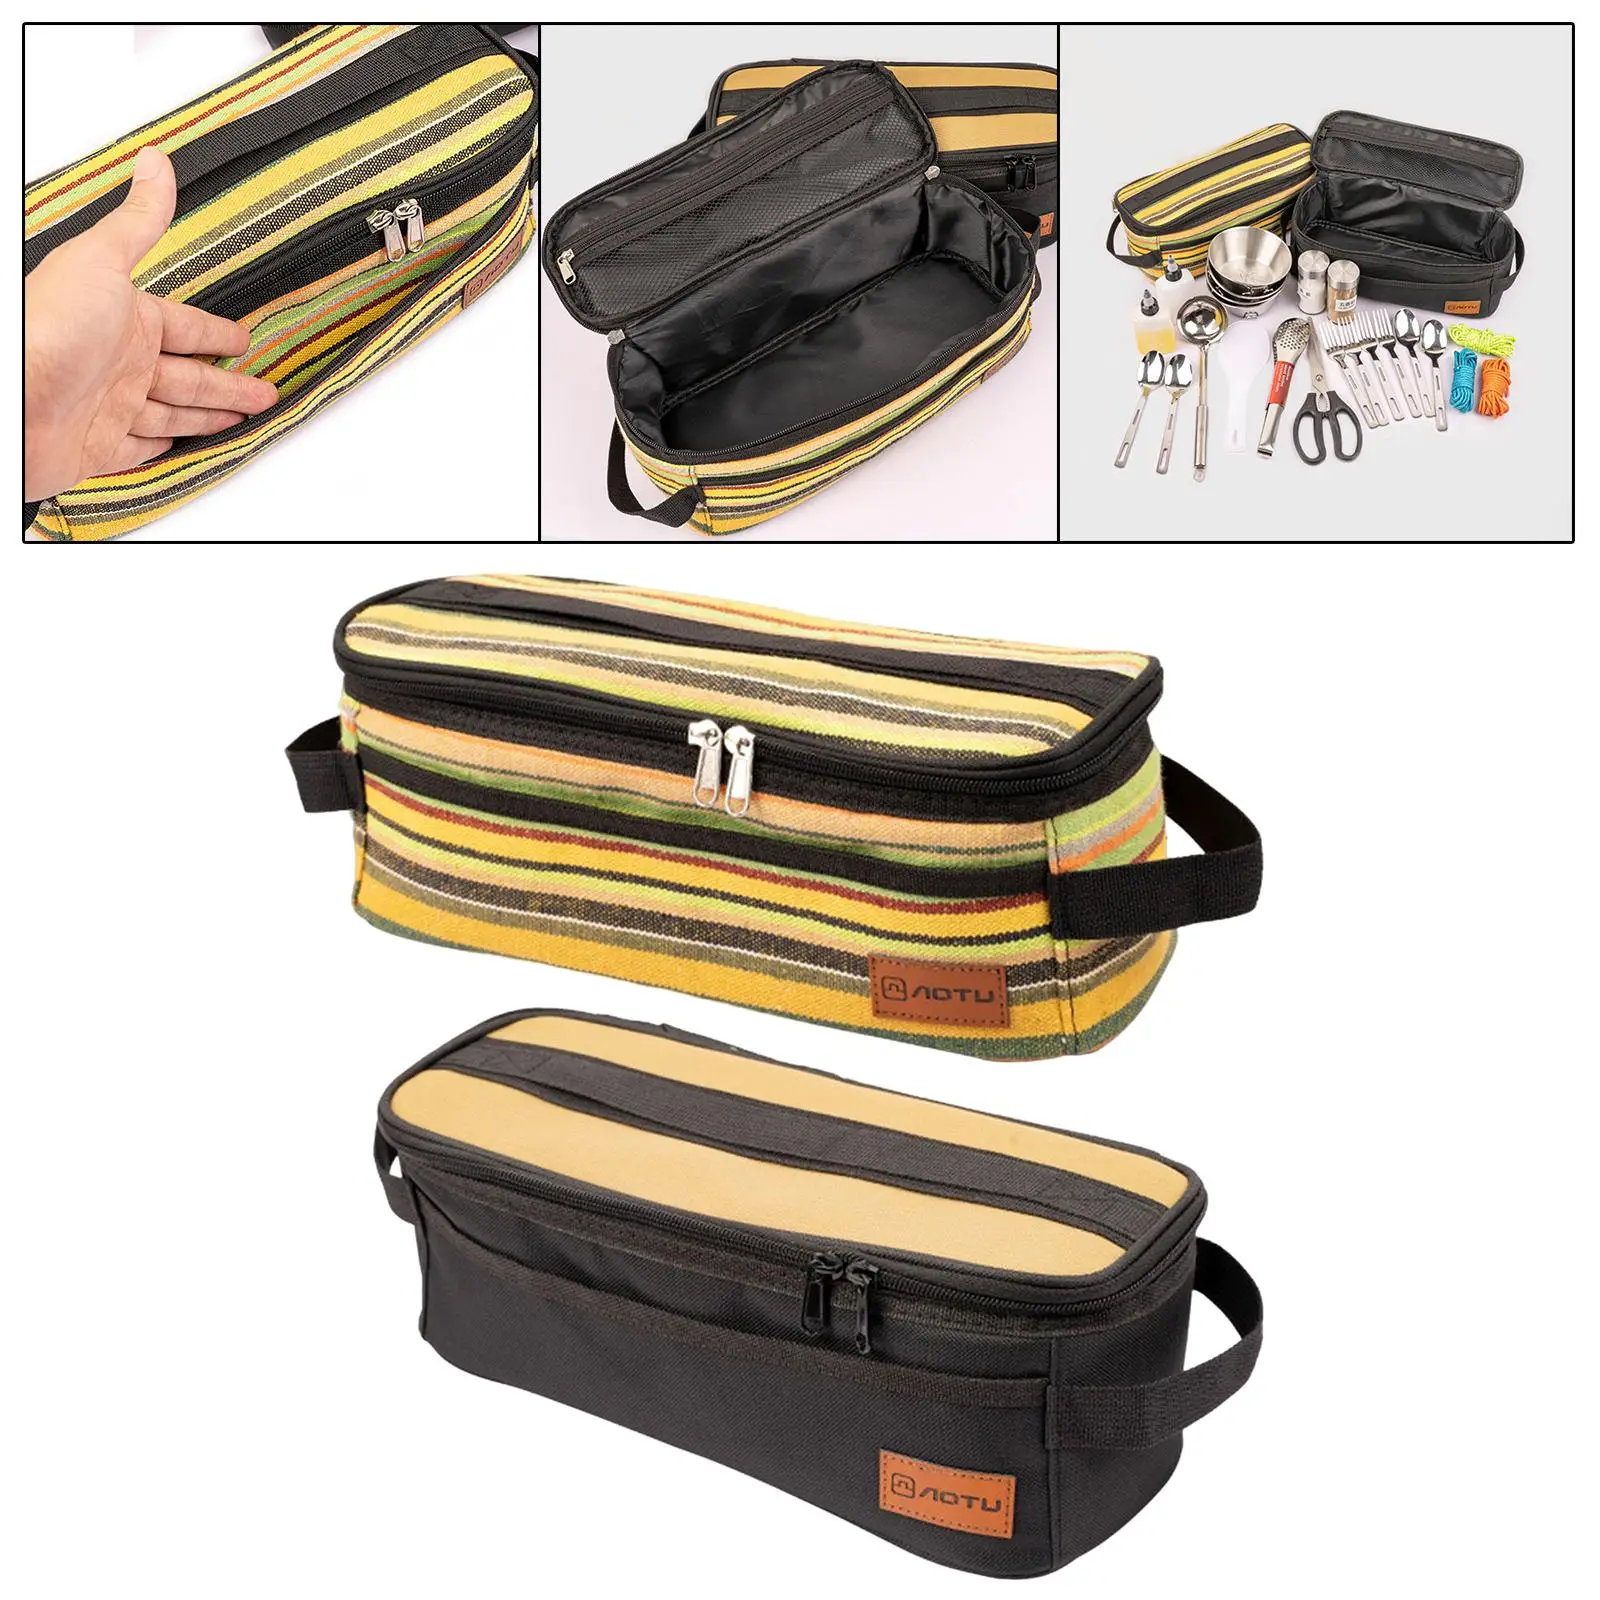 BBQ Camping Cooking Utensils Barbecue Tool Bag Fashionable Waterproof Oxford